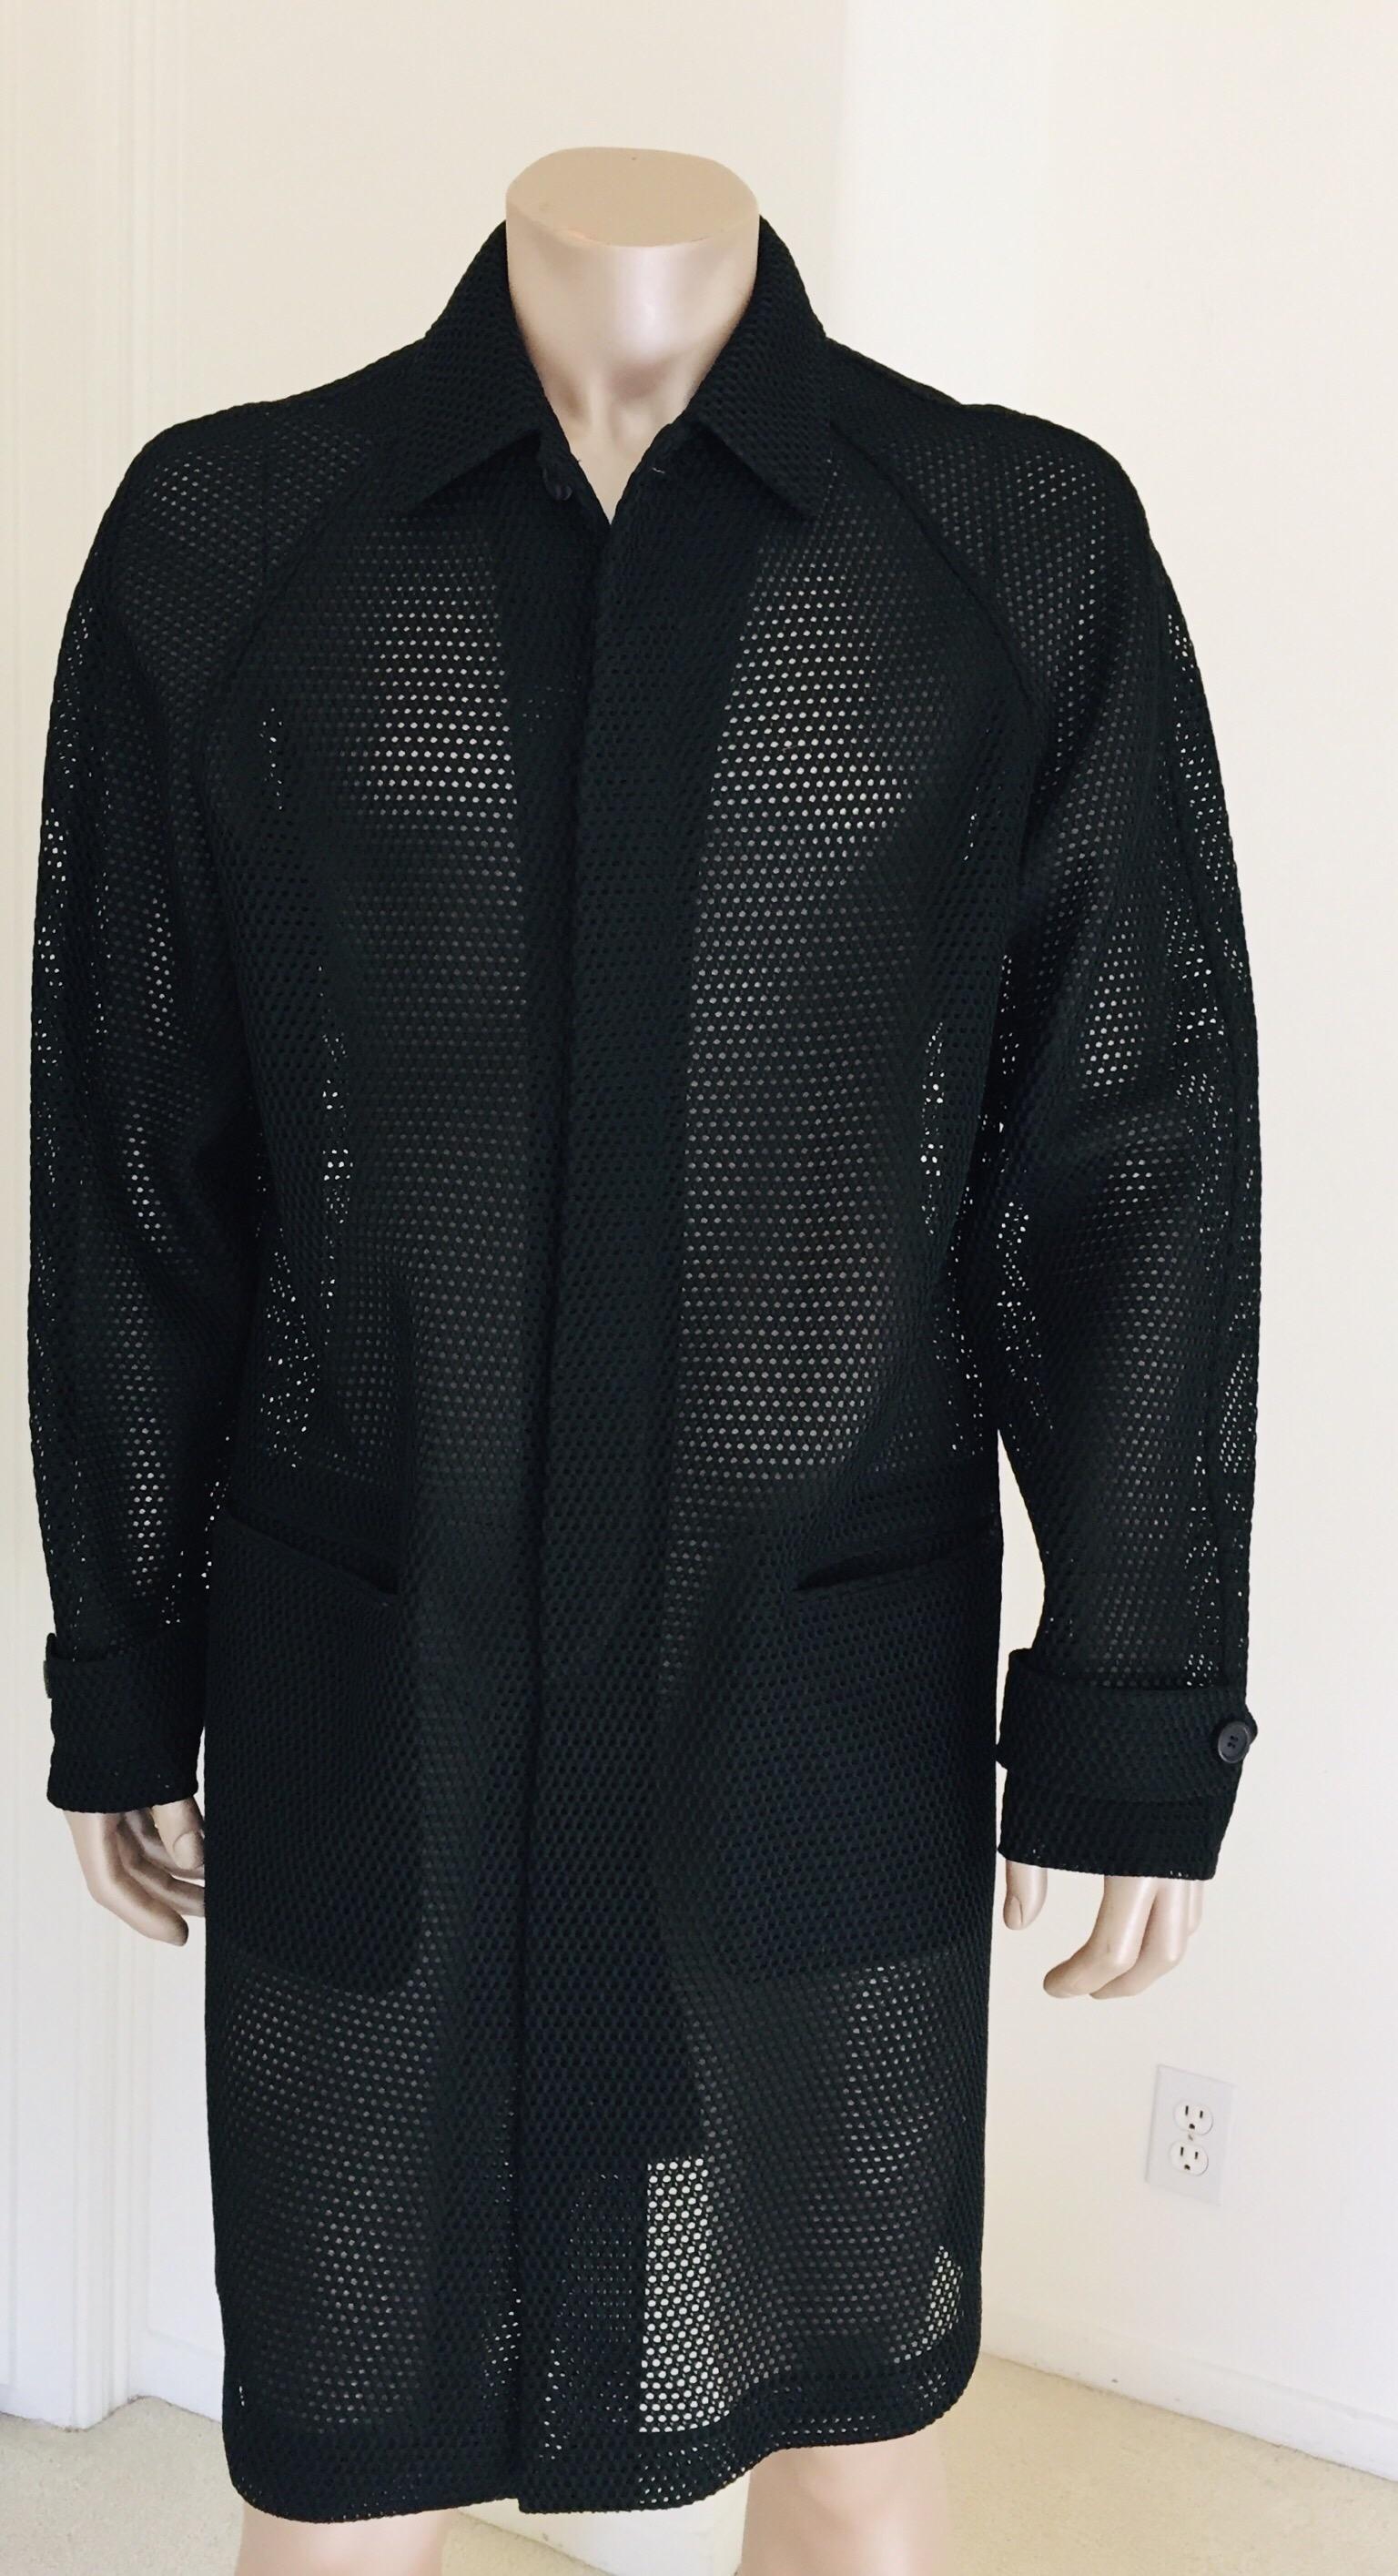 Prada black overcoat.
Flap pockets on the side
Adjustable straps on the cuffs
Light summery overcoat, see through lace.
Size 52.
Garment length: 44 inches.
Made in Italy.
Like new.
Prada Milano black label.